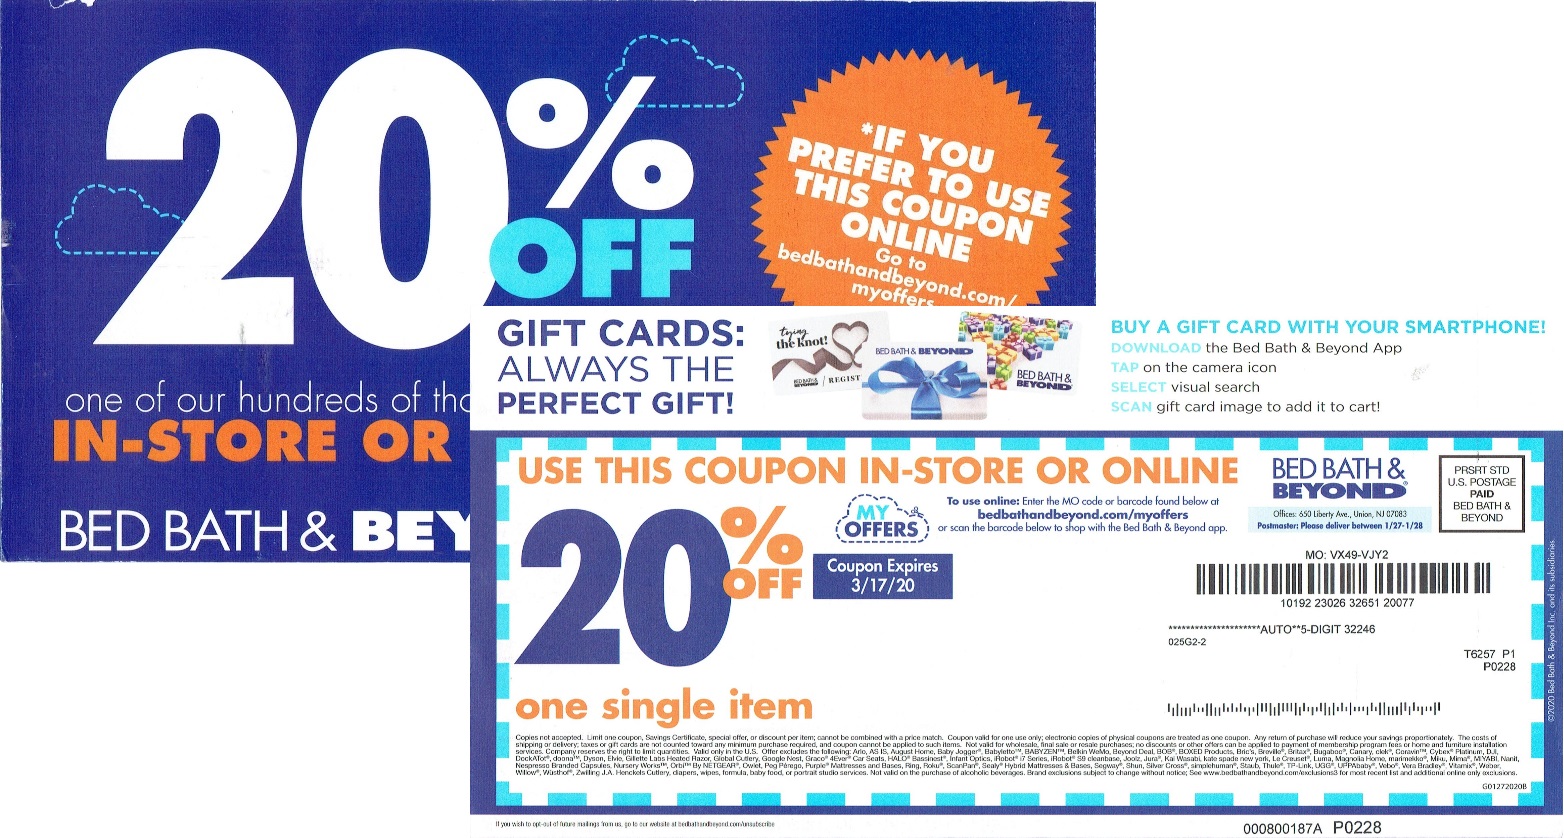 Bed Bath & Beyond direct mail example 